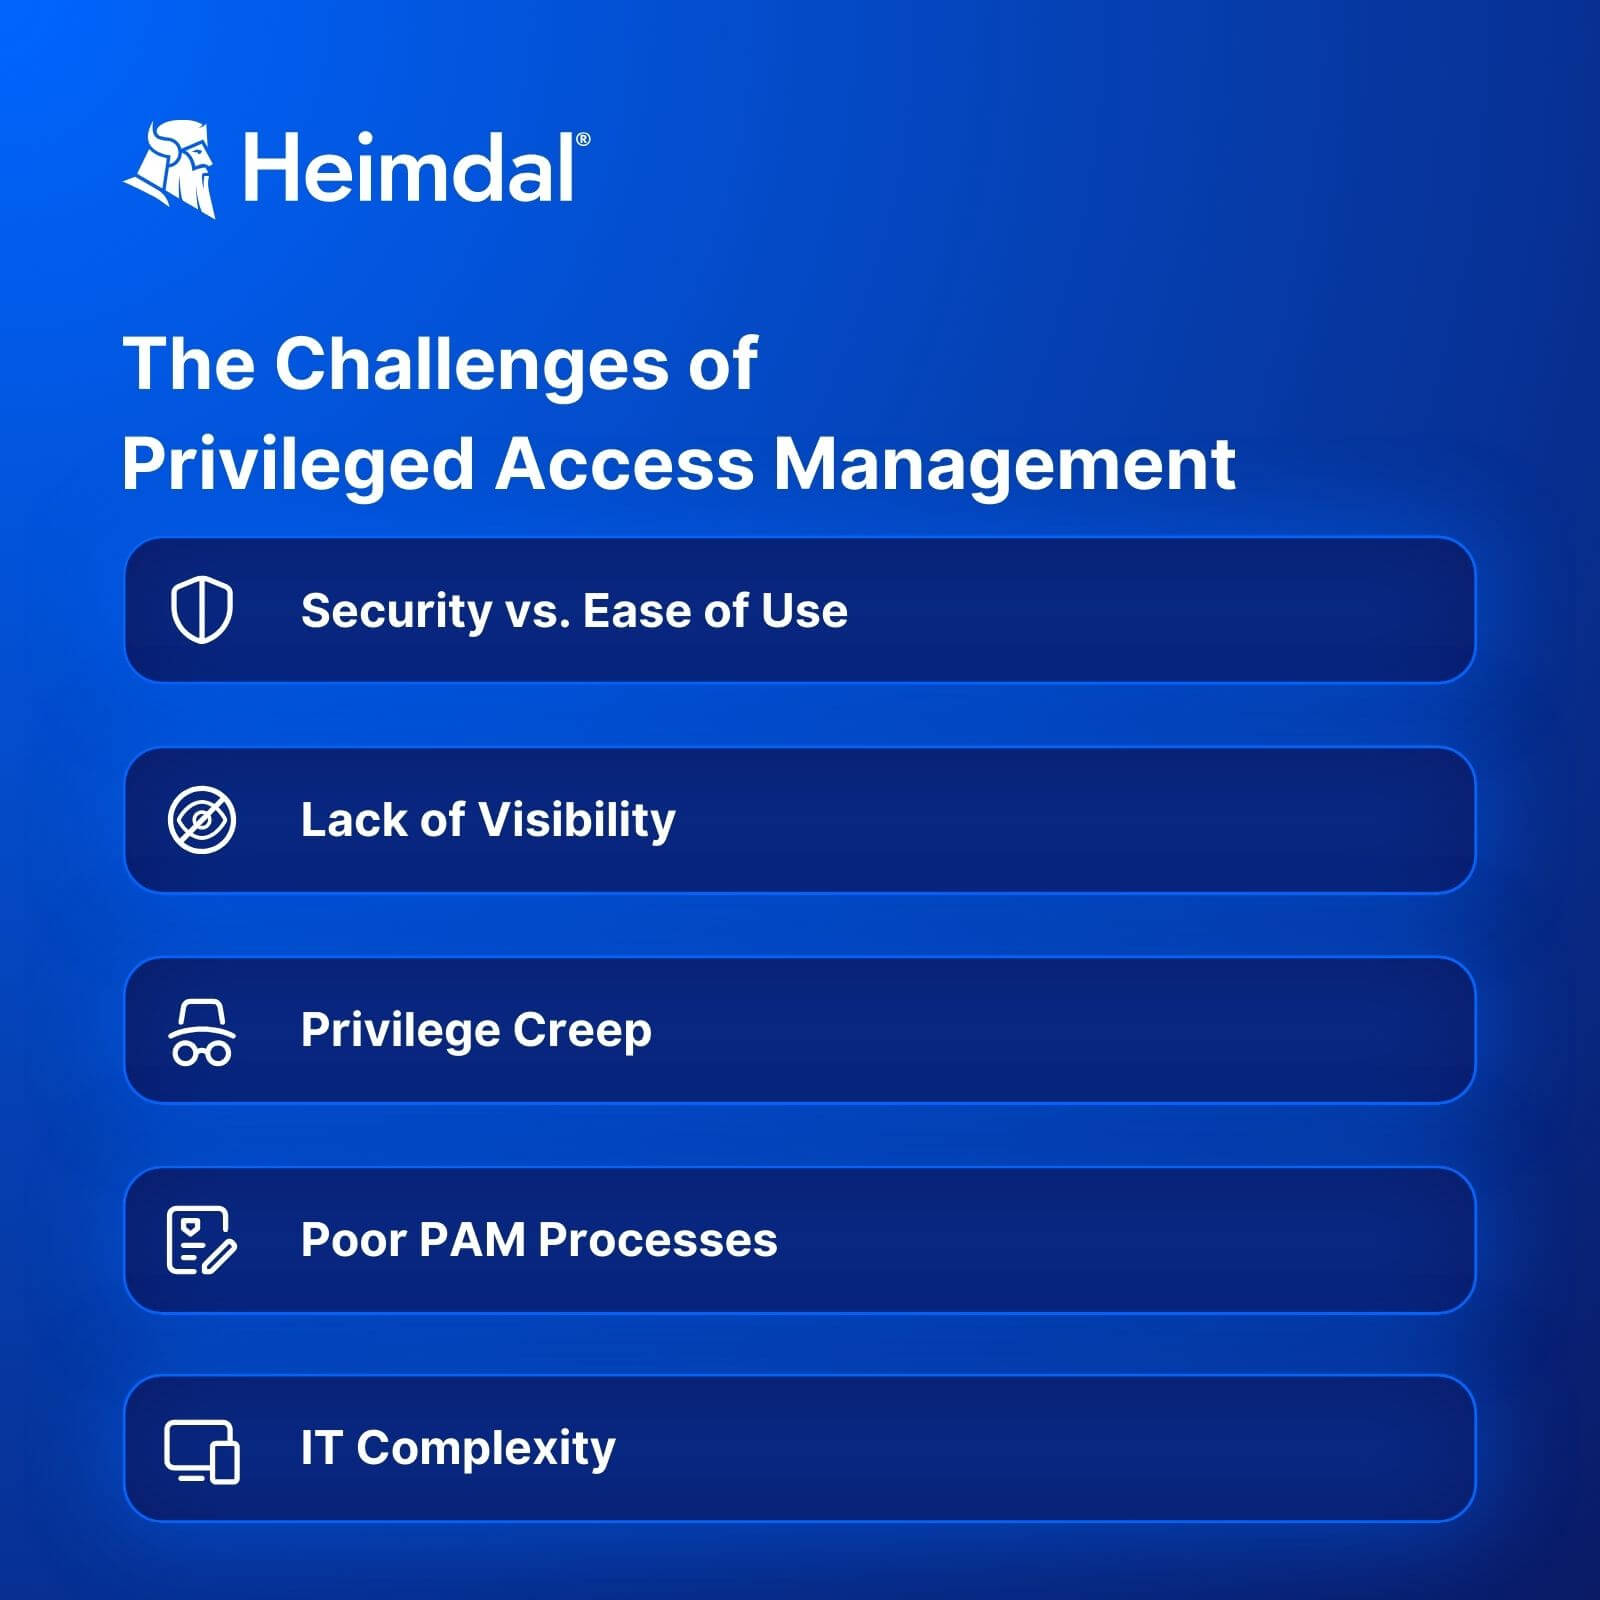 table containing the most common challenges related to privileged access management